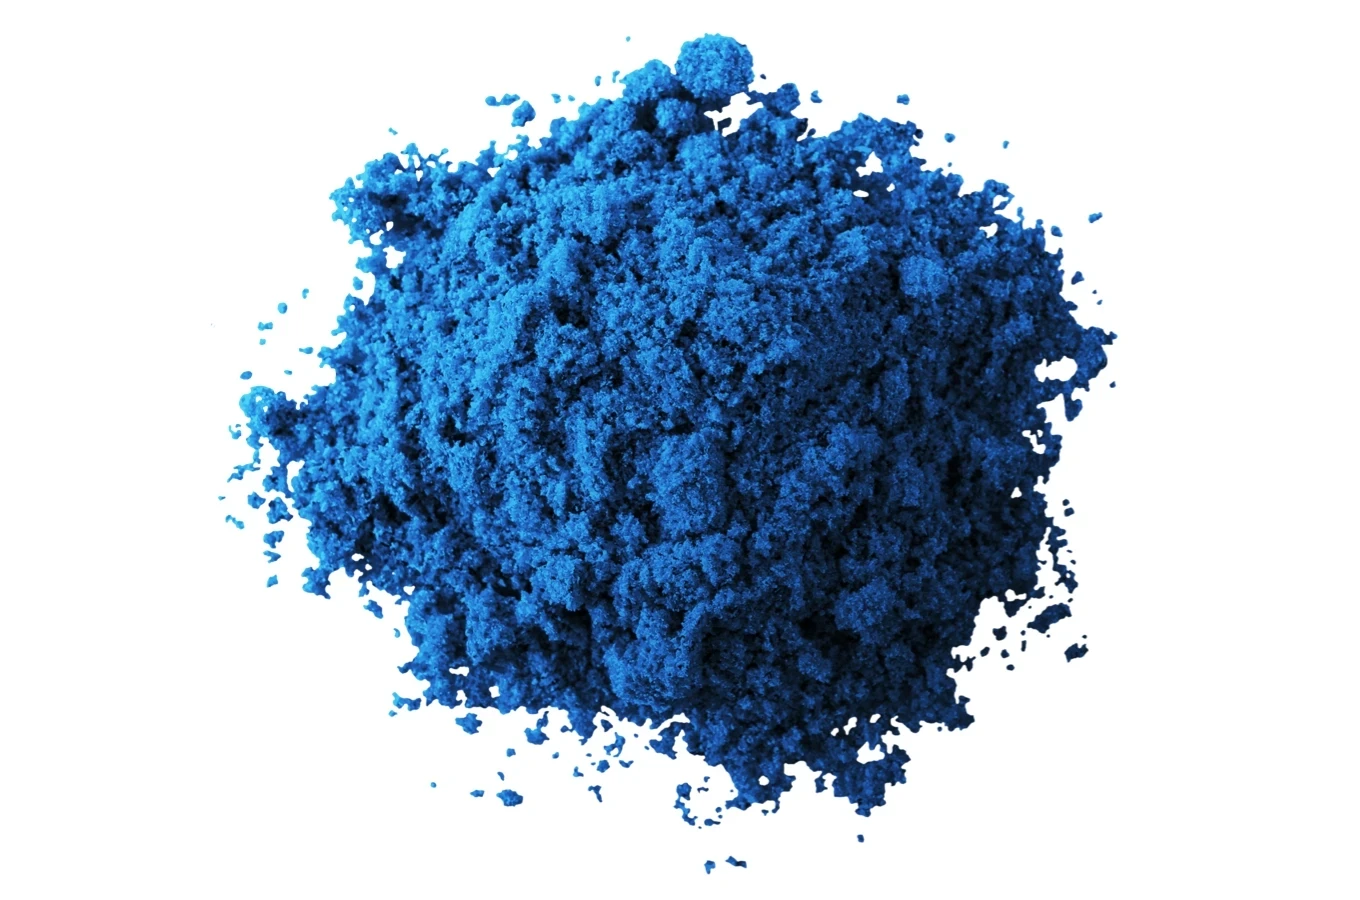 Prussian blue material